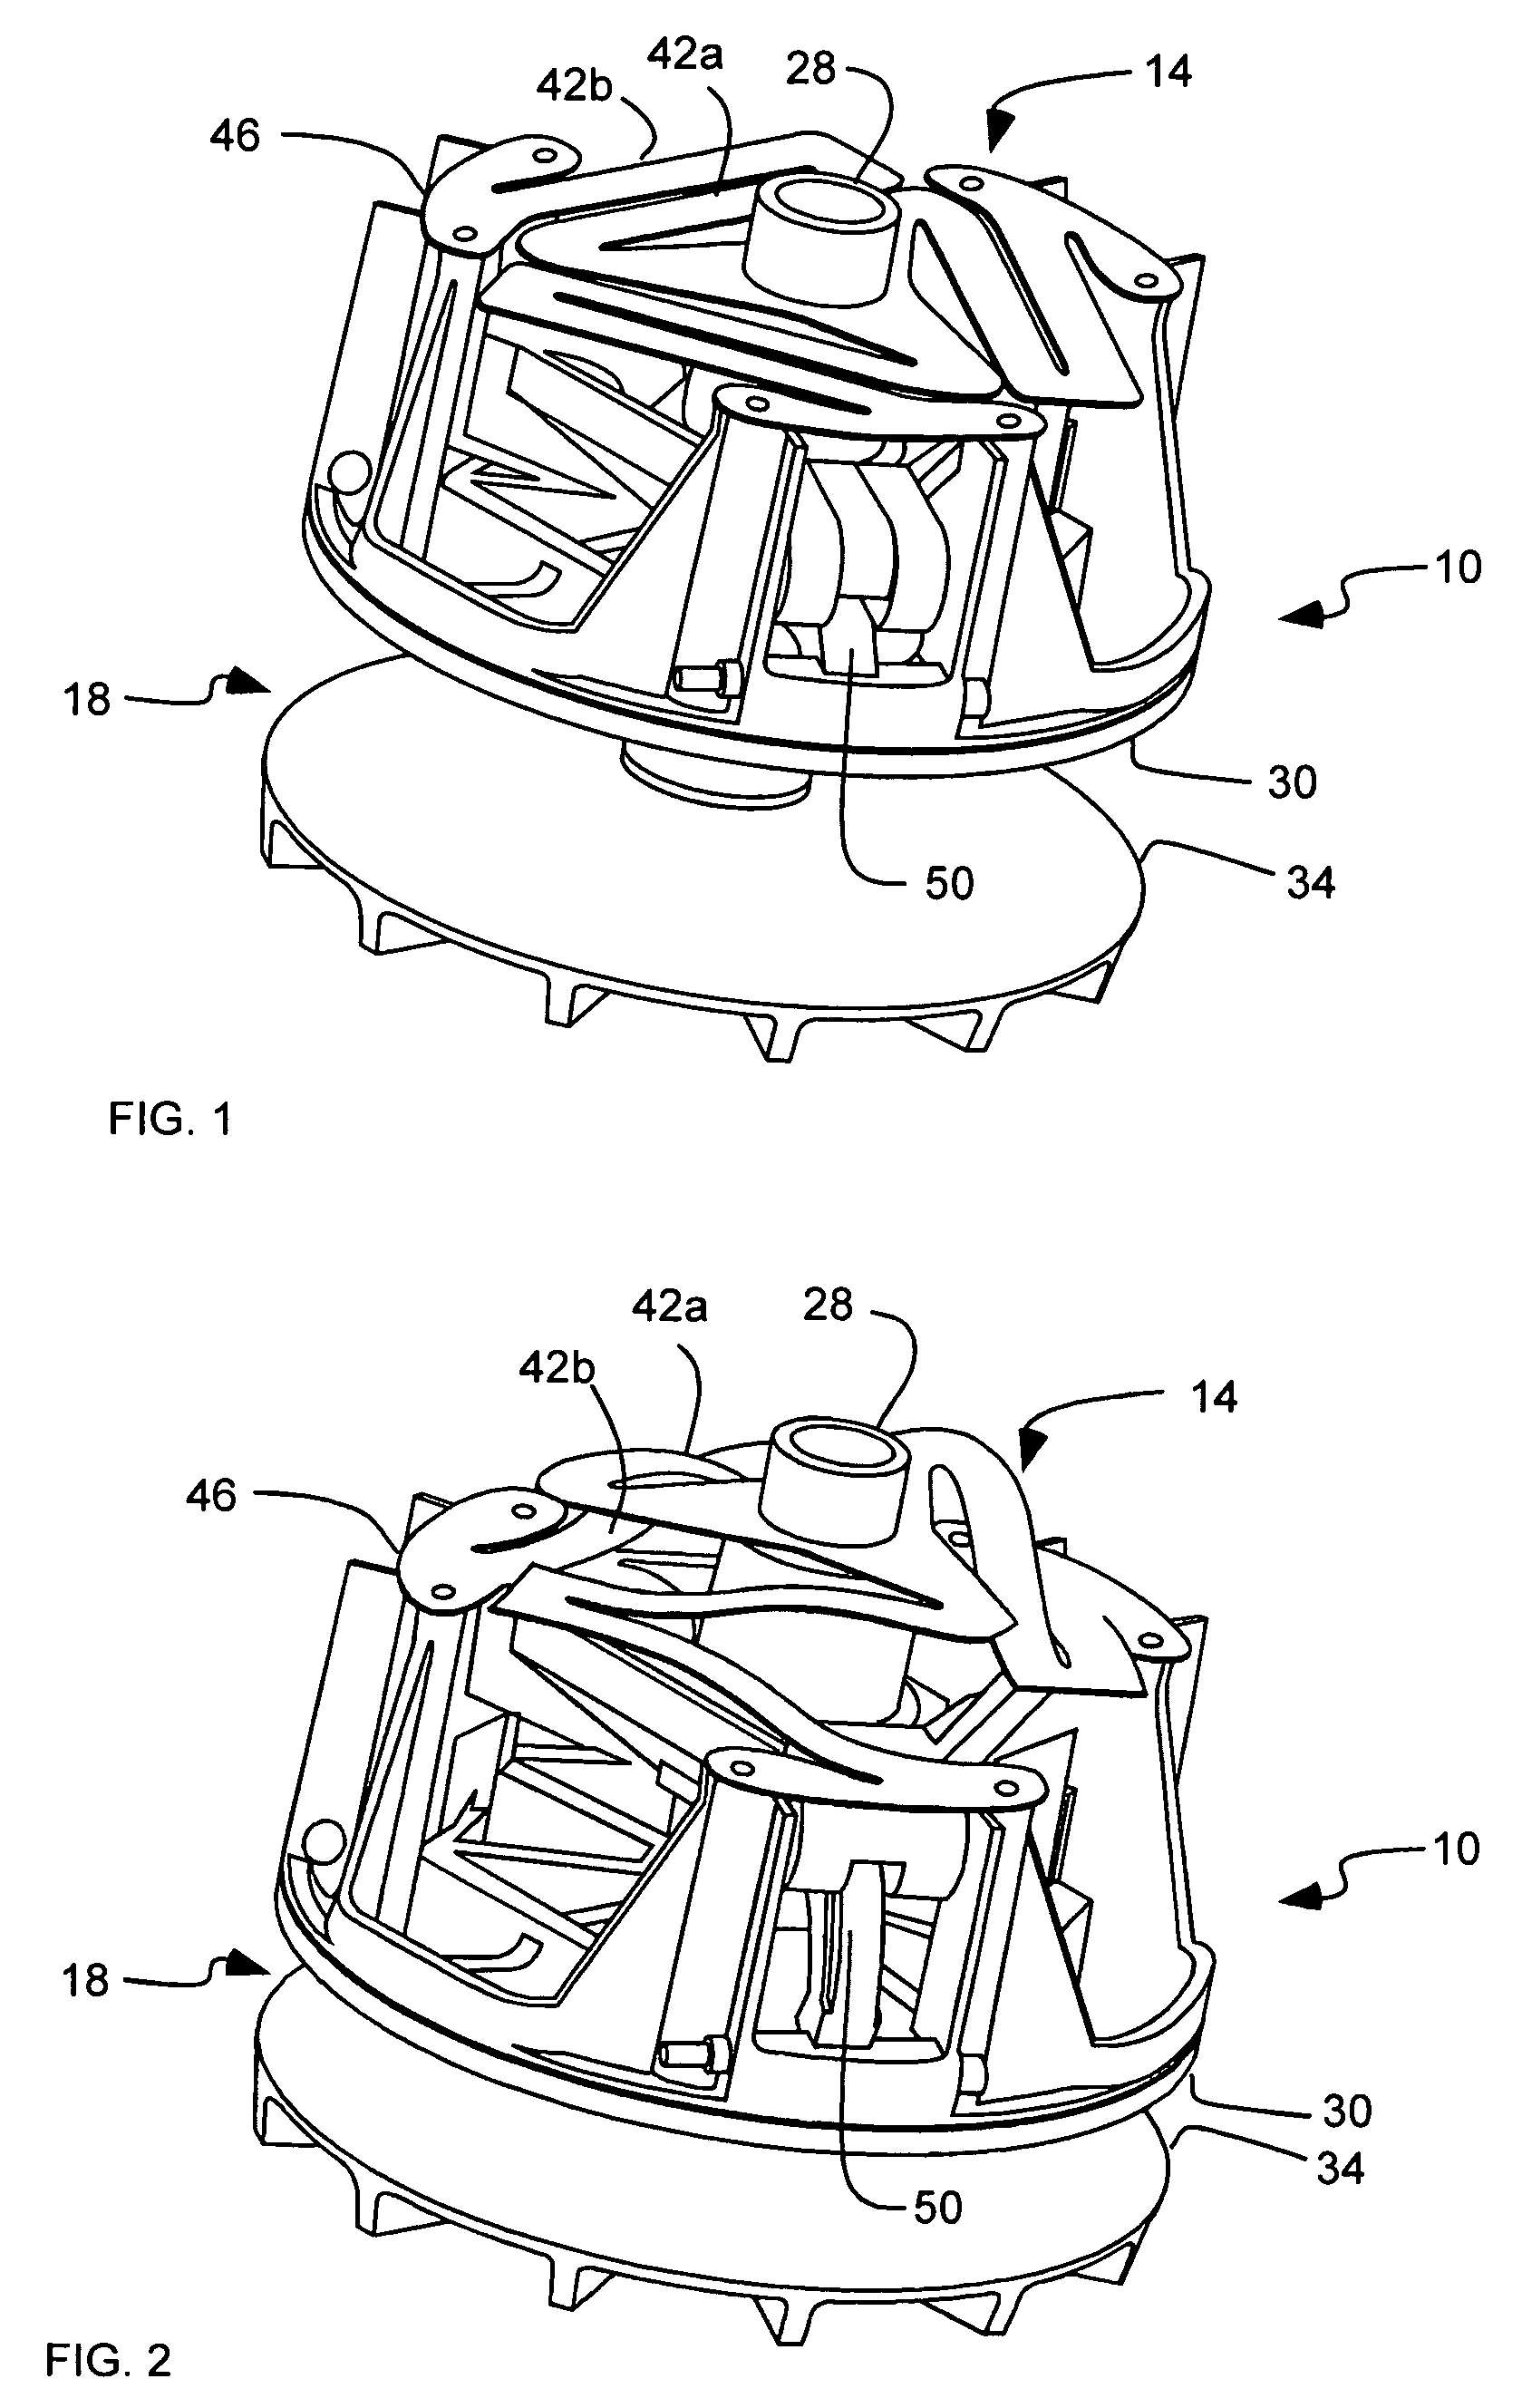 Continuously variable transmission or clutch with ortho-planar compliant mechanism